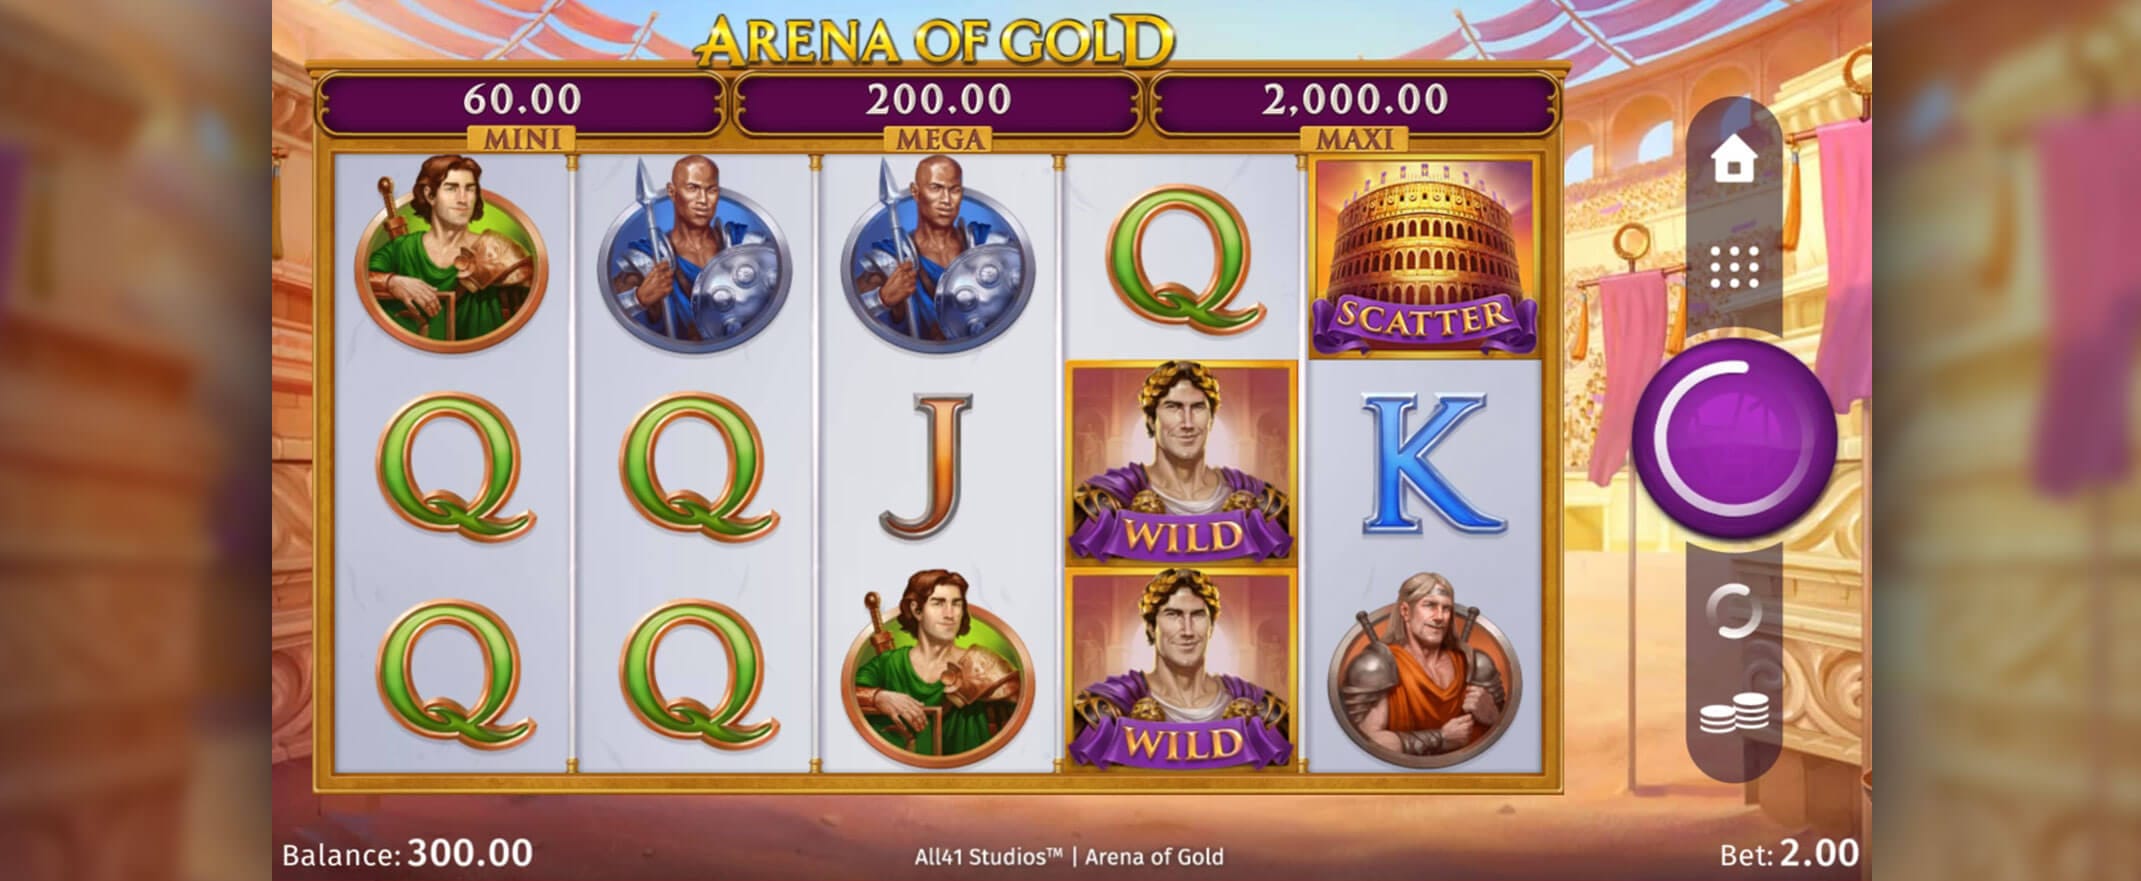 Arena of Gold Free Slots